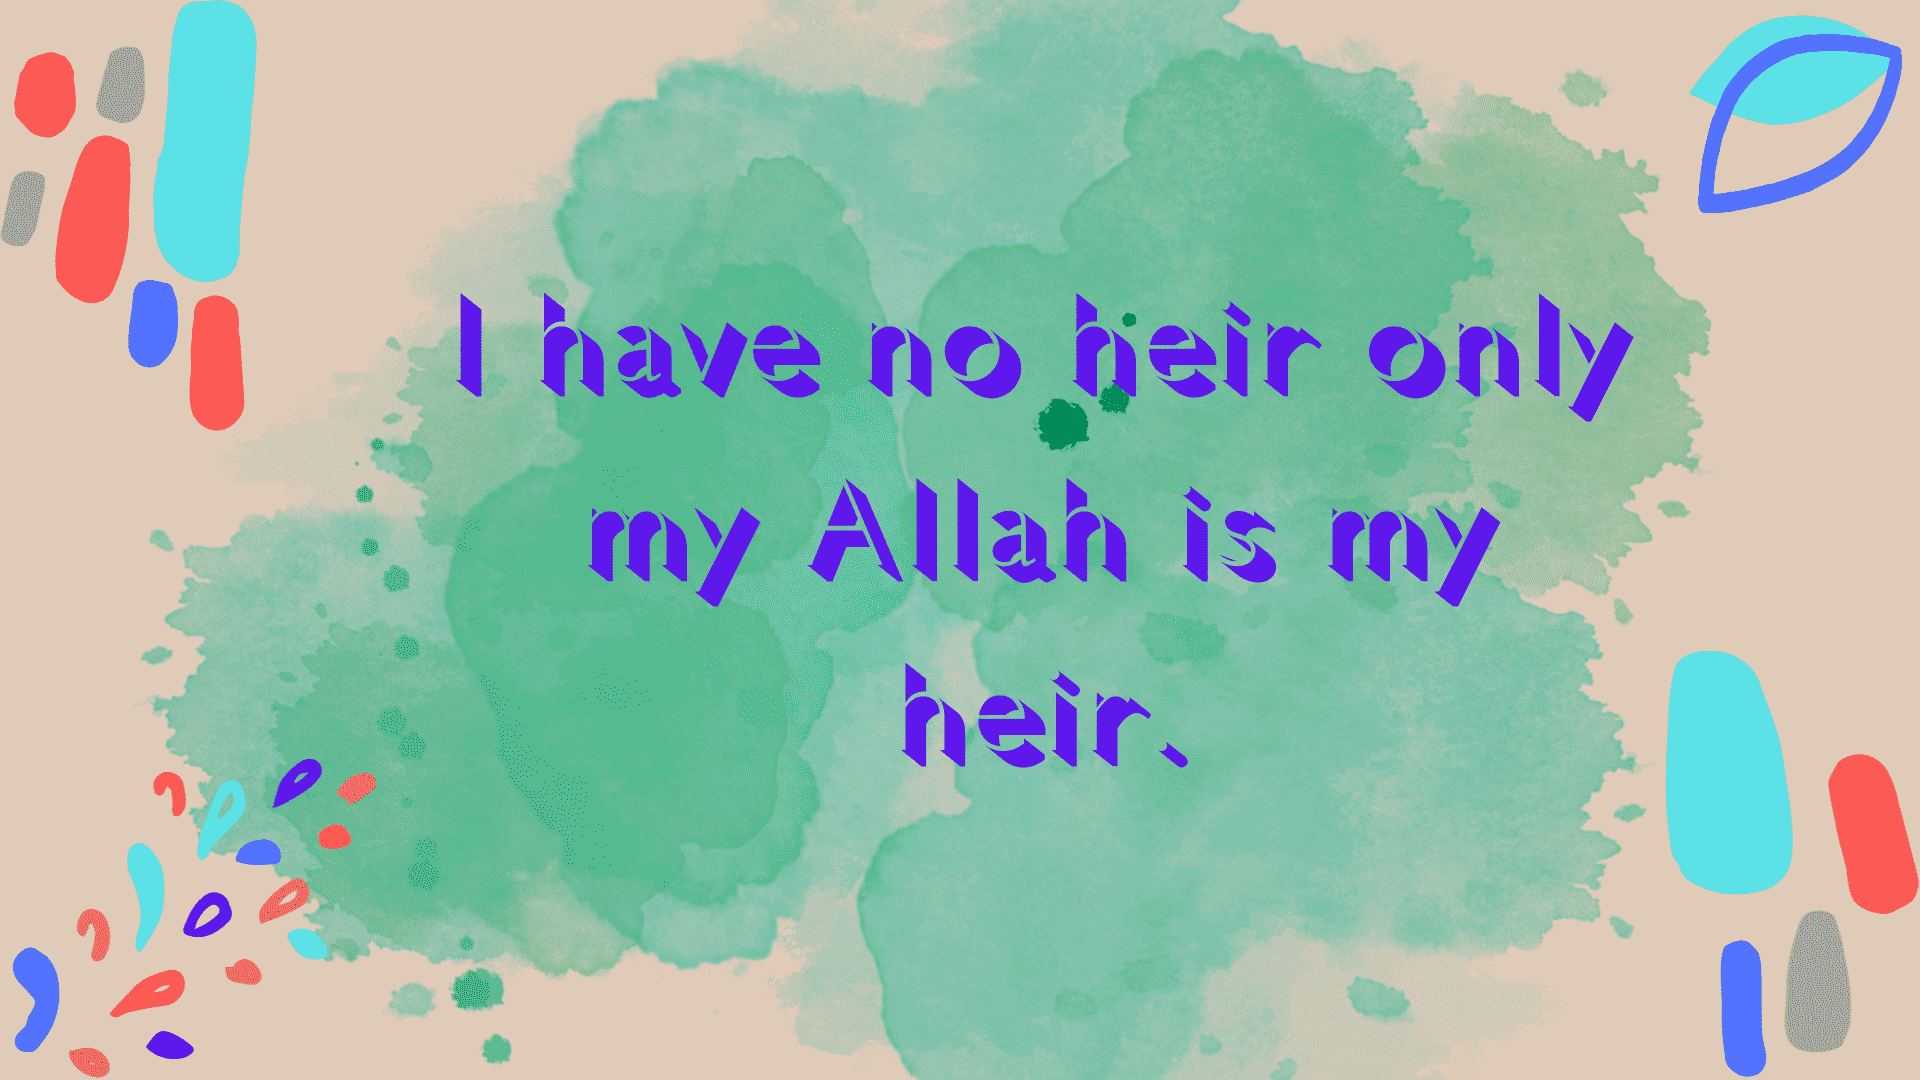 I have no heir only my Allah is my heir.